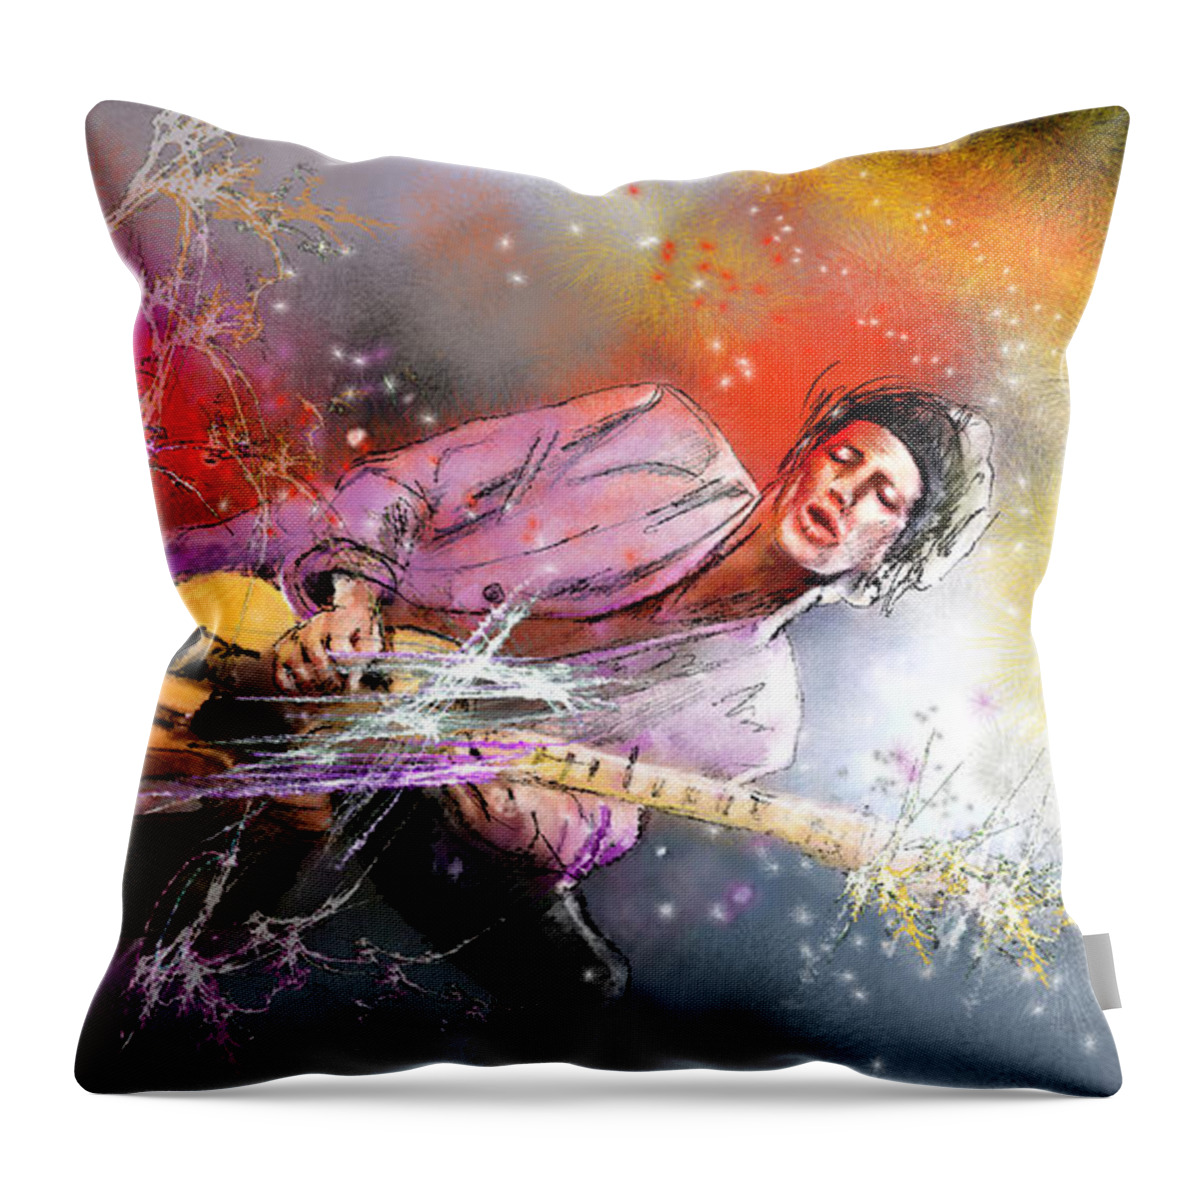 Keith Richards Throw Pillow featuring the painting Keith Richards 02 by Miki De Goodaboom